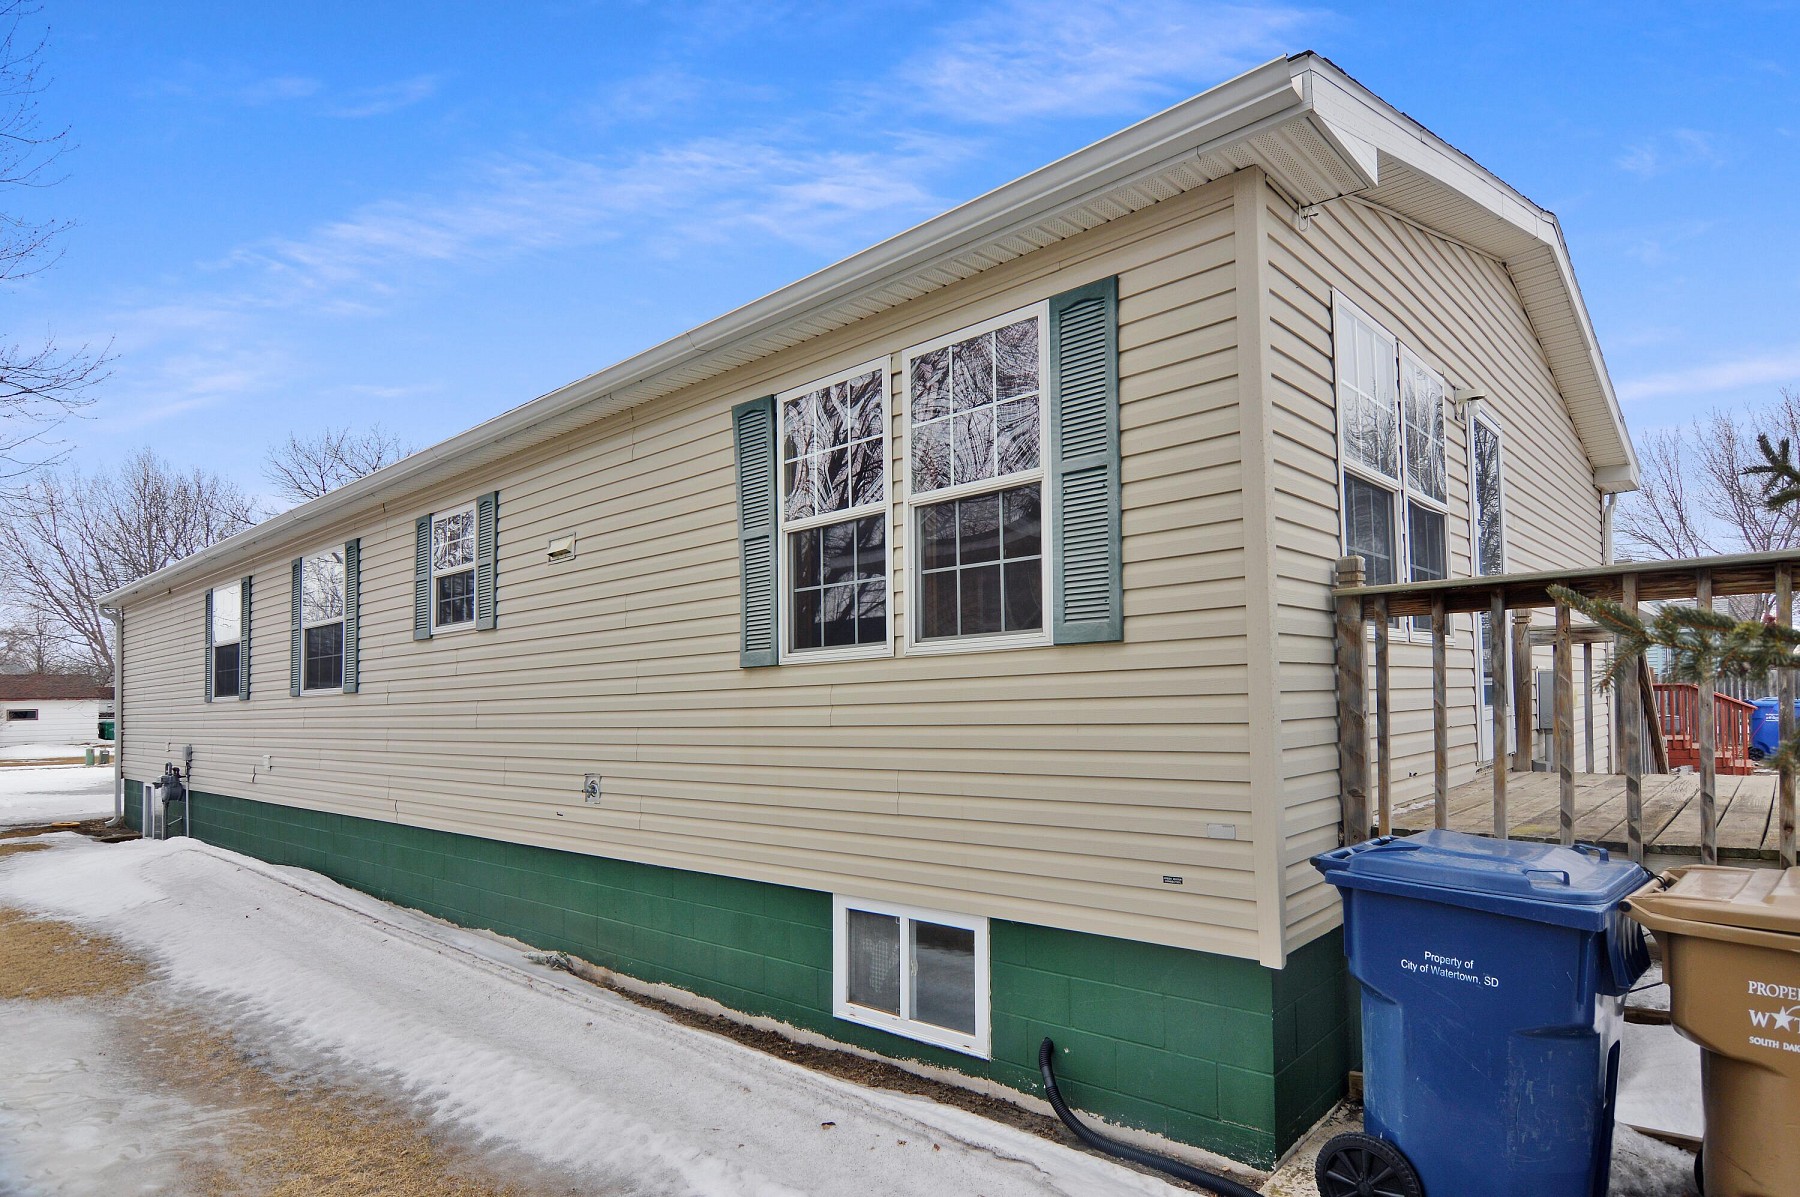 109 15th Street NW, Watertown, SD 57201